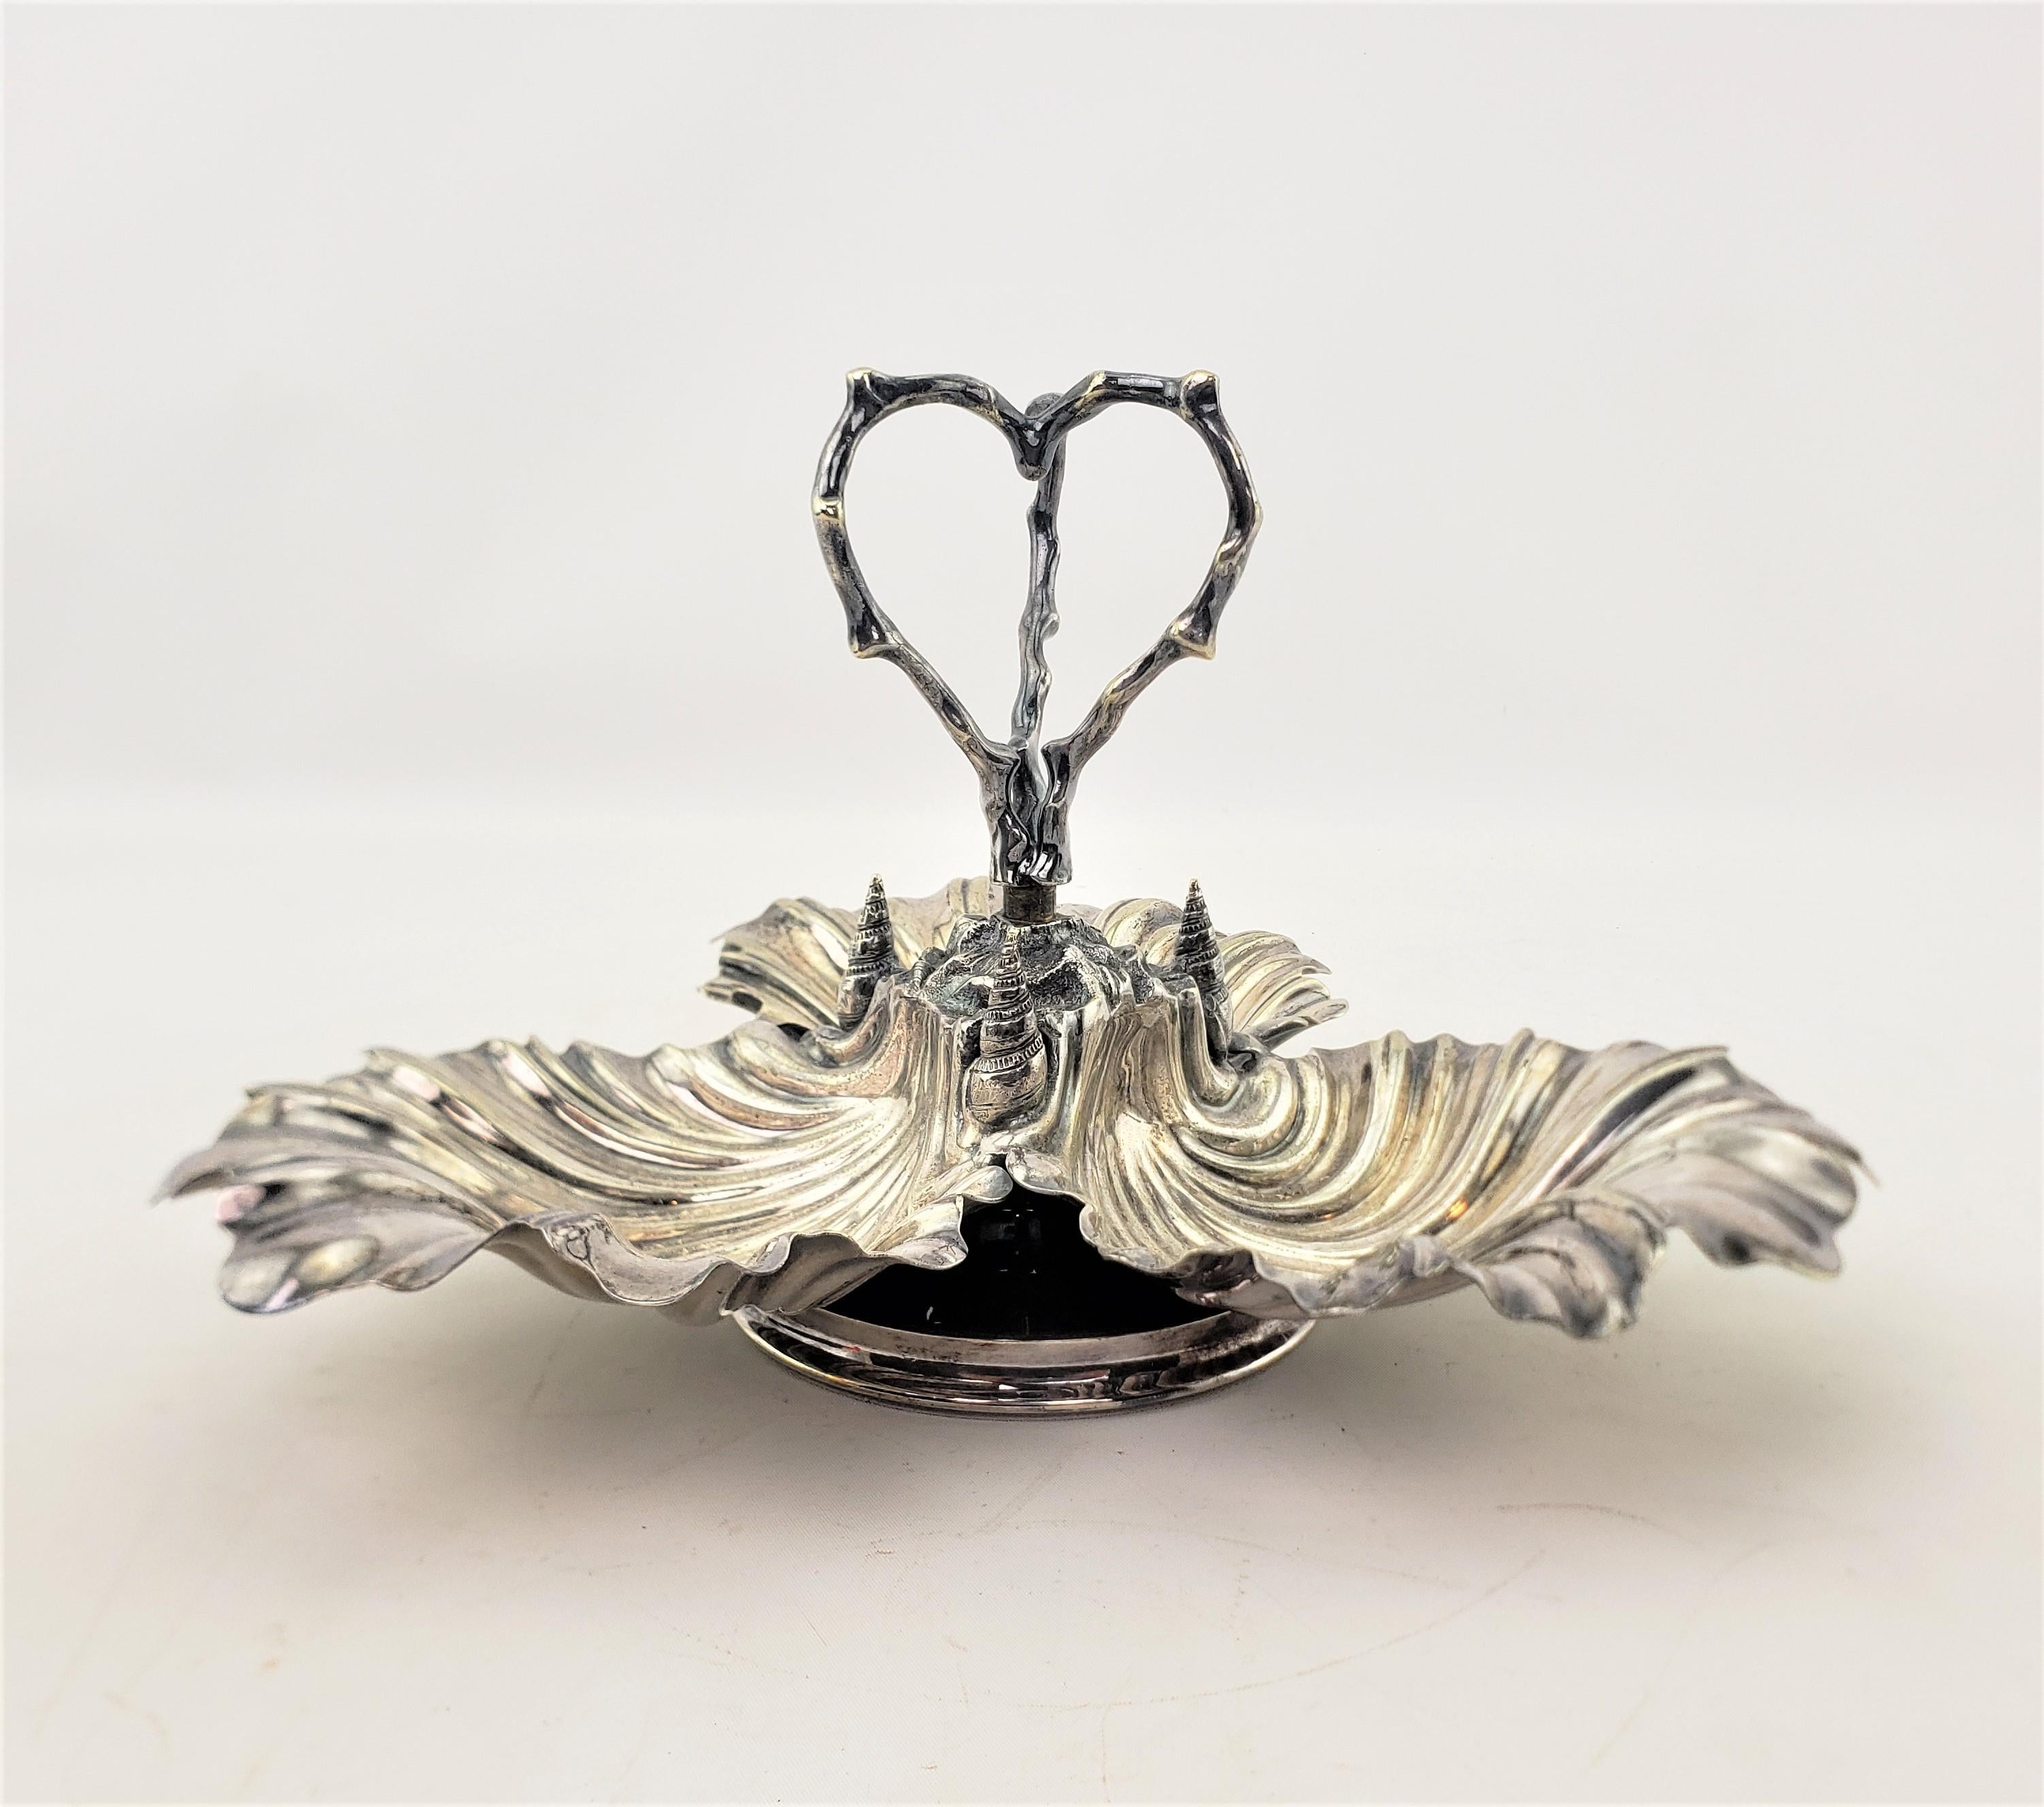 Antique English Silver Plated Partitioned Serving Bowl or Condiment Dish For Sale 1